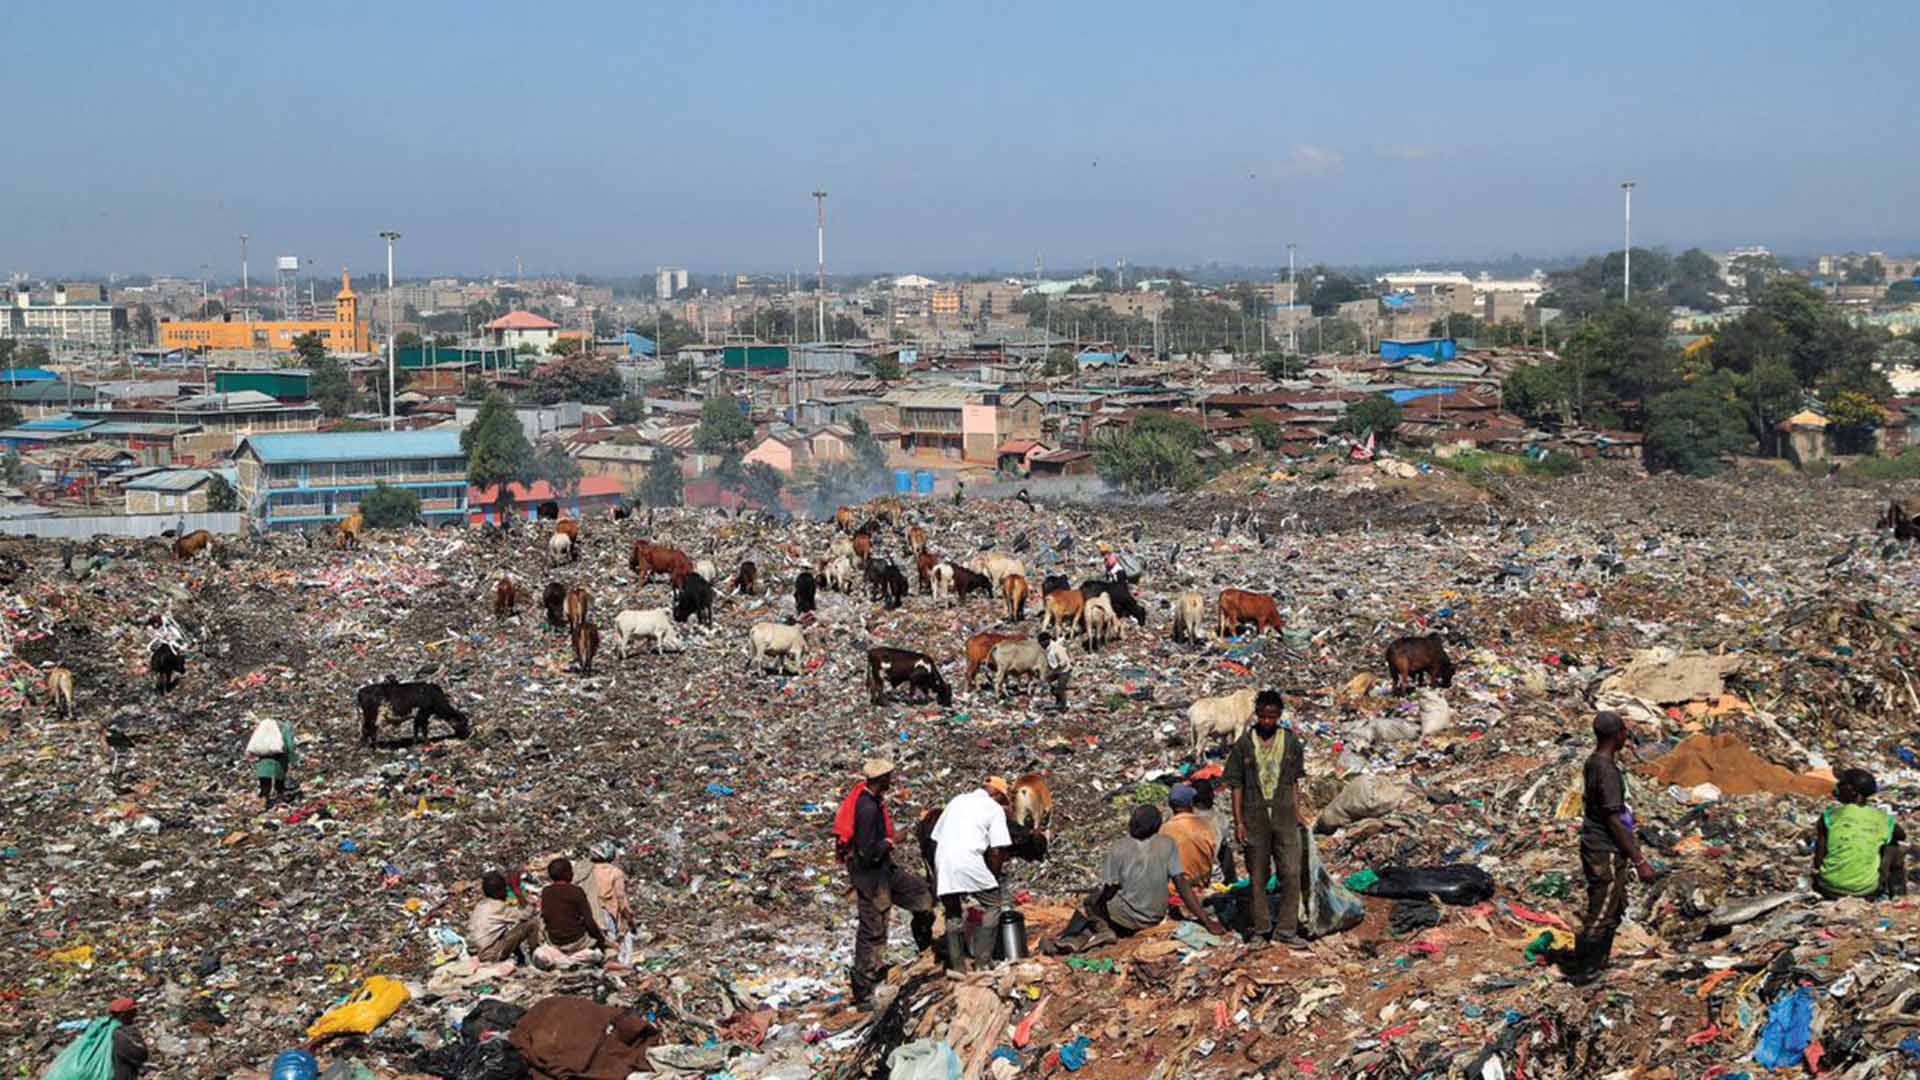 Dandora landfill in Nairobi, Kenya, where much of the waste in the landfill is plastic